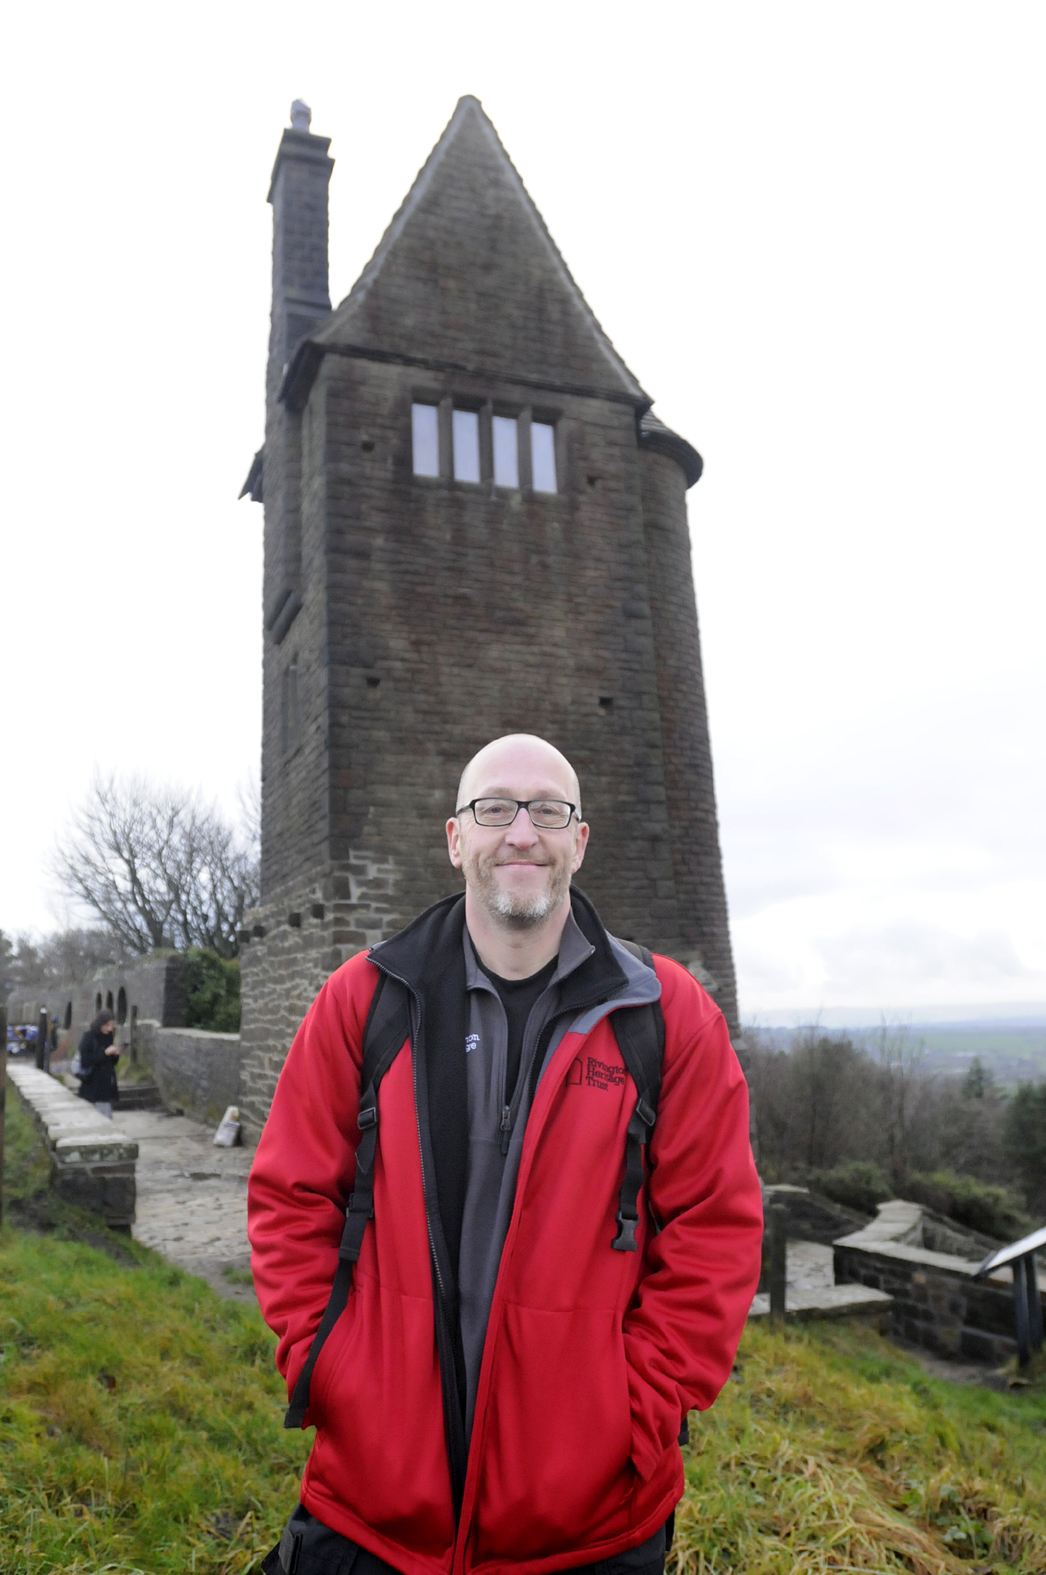 Andrew Suter at the Pigeon Tower in Rivington Terraced Gardens.